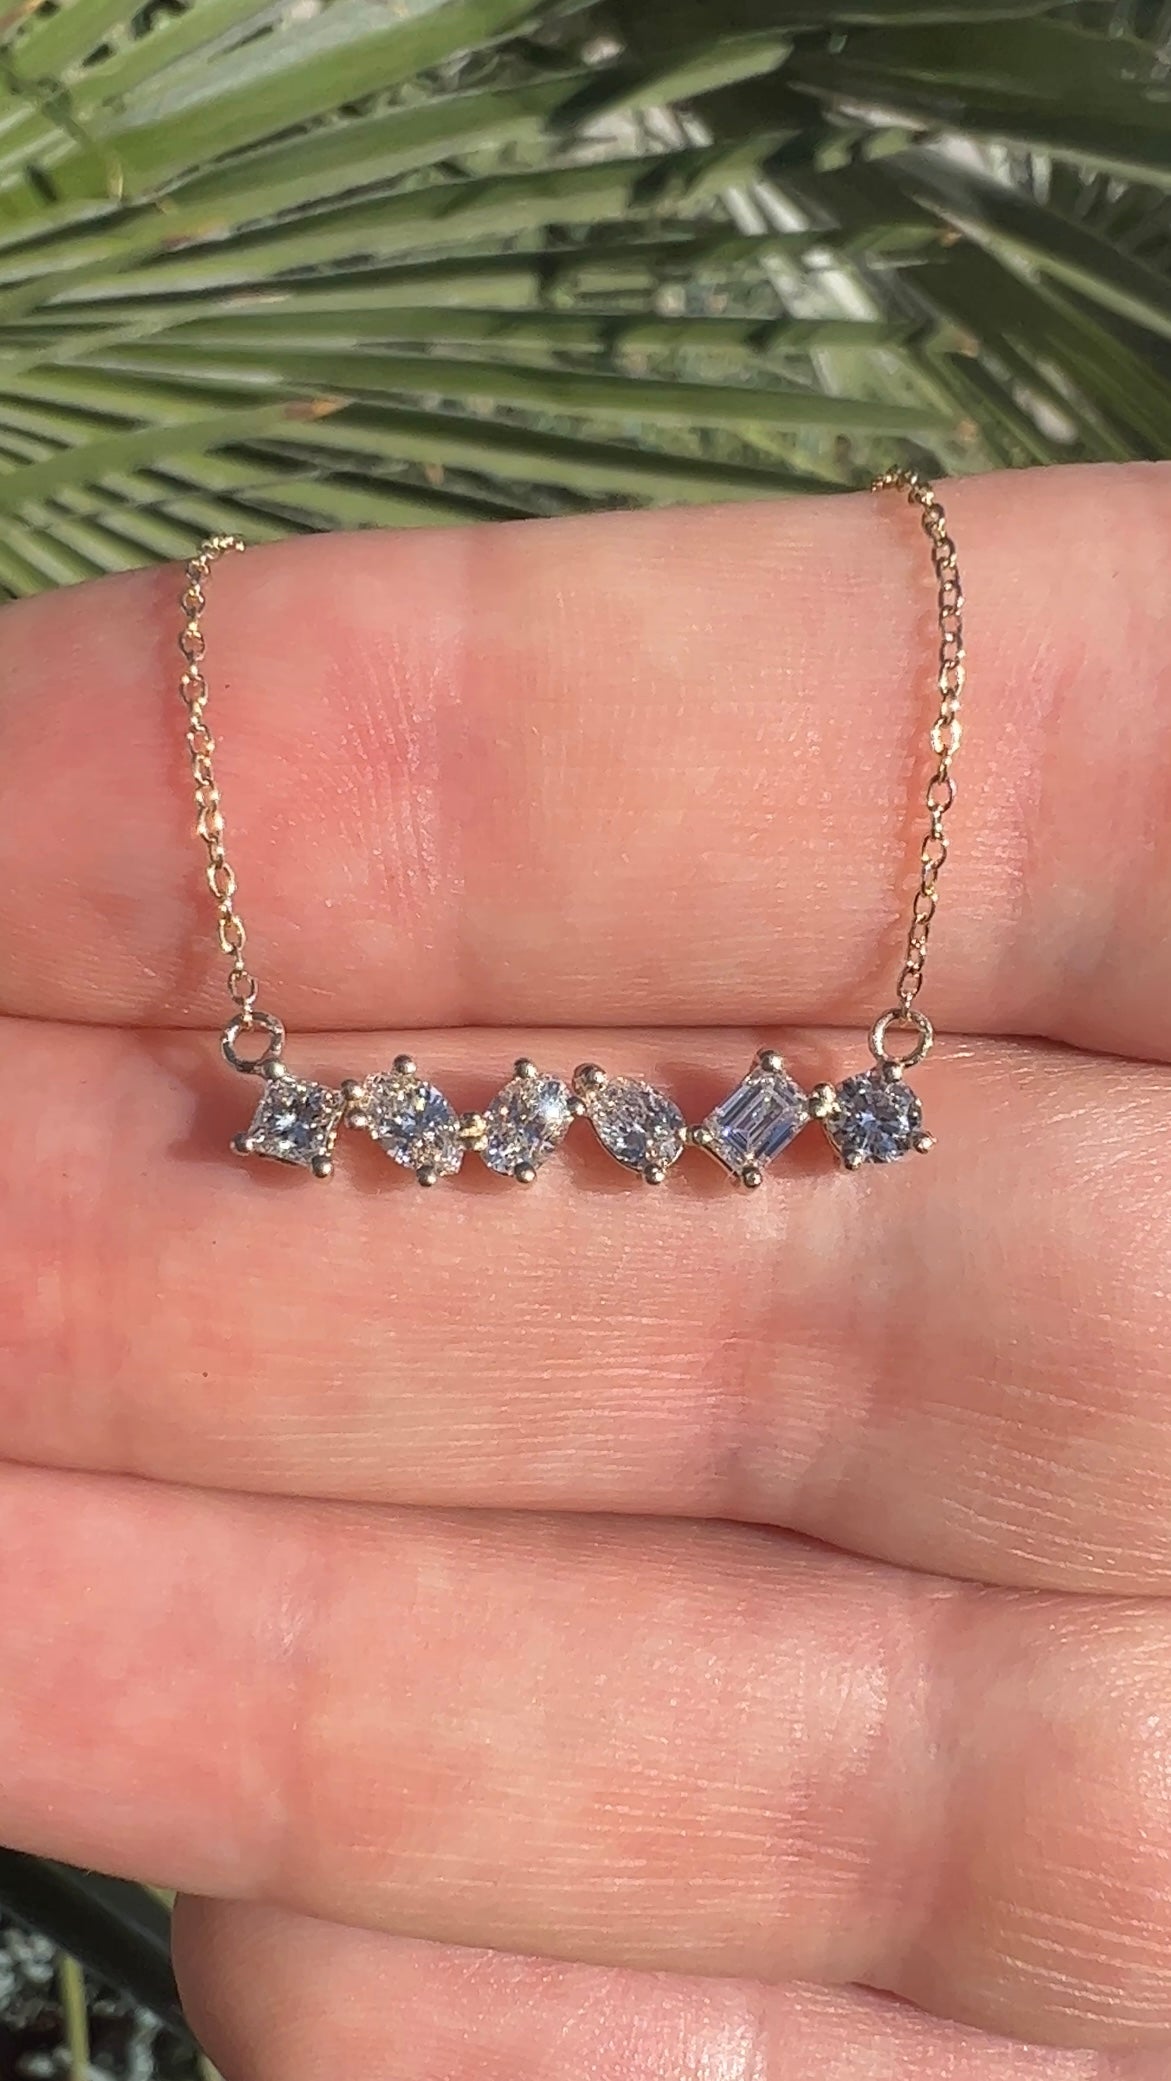 Magnificent new multi shape diamond necklaces available! Yes full stones  and a ring to go with it as well! | Instagram